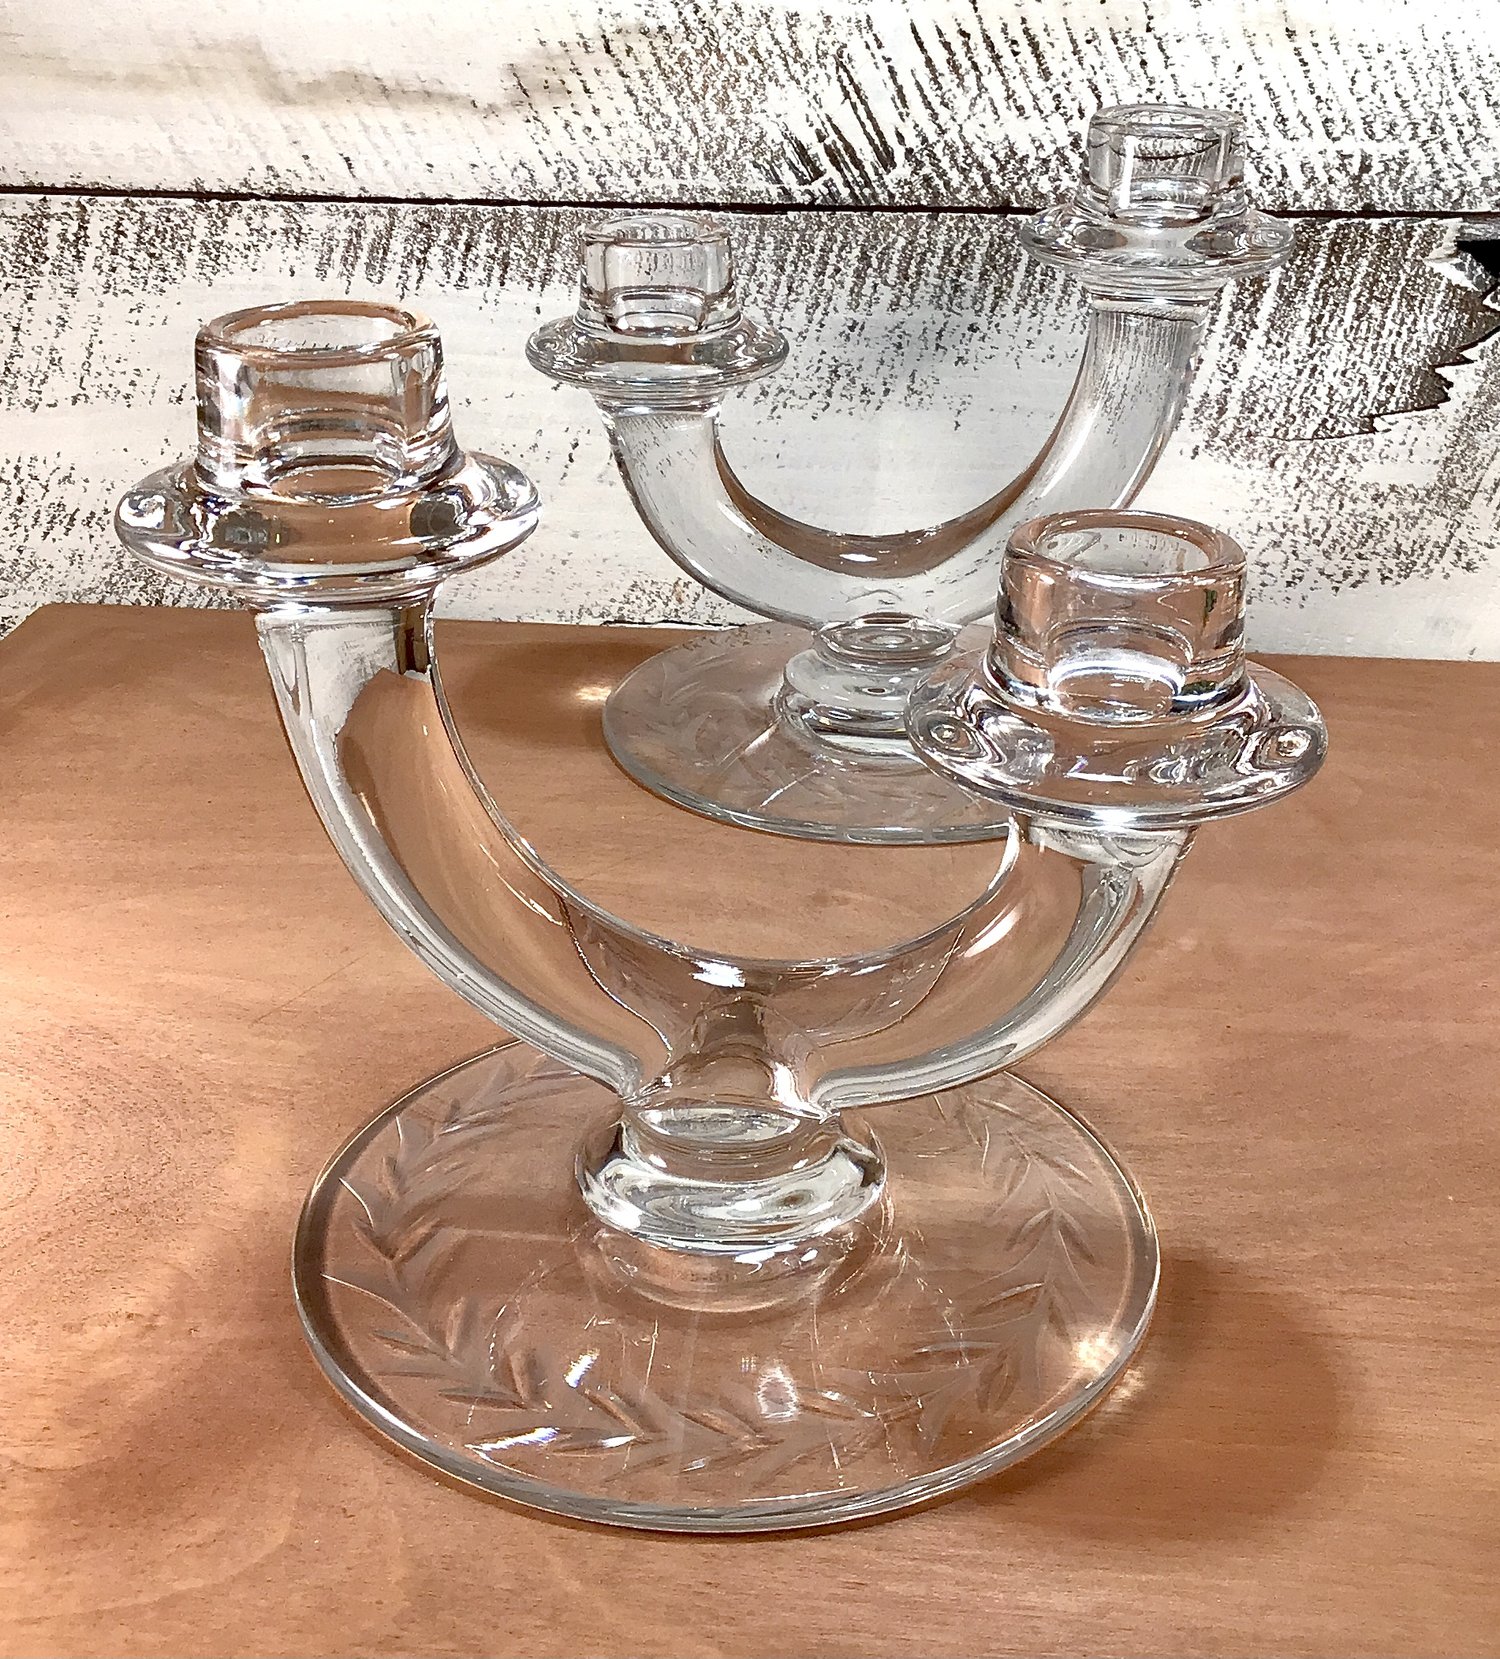 glass White & Silver Honeycomb Roly Poly Candle Holder 0 stars at